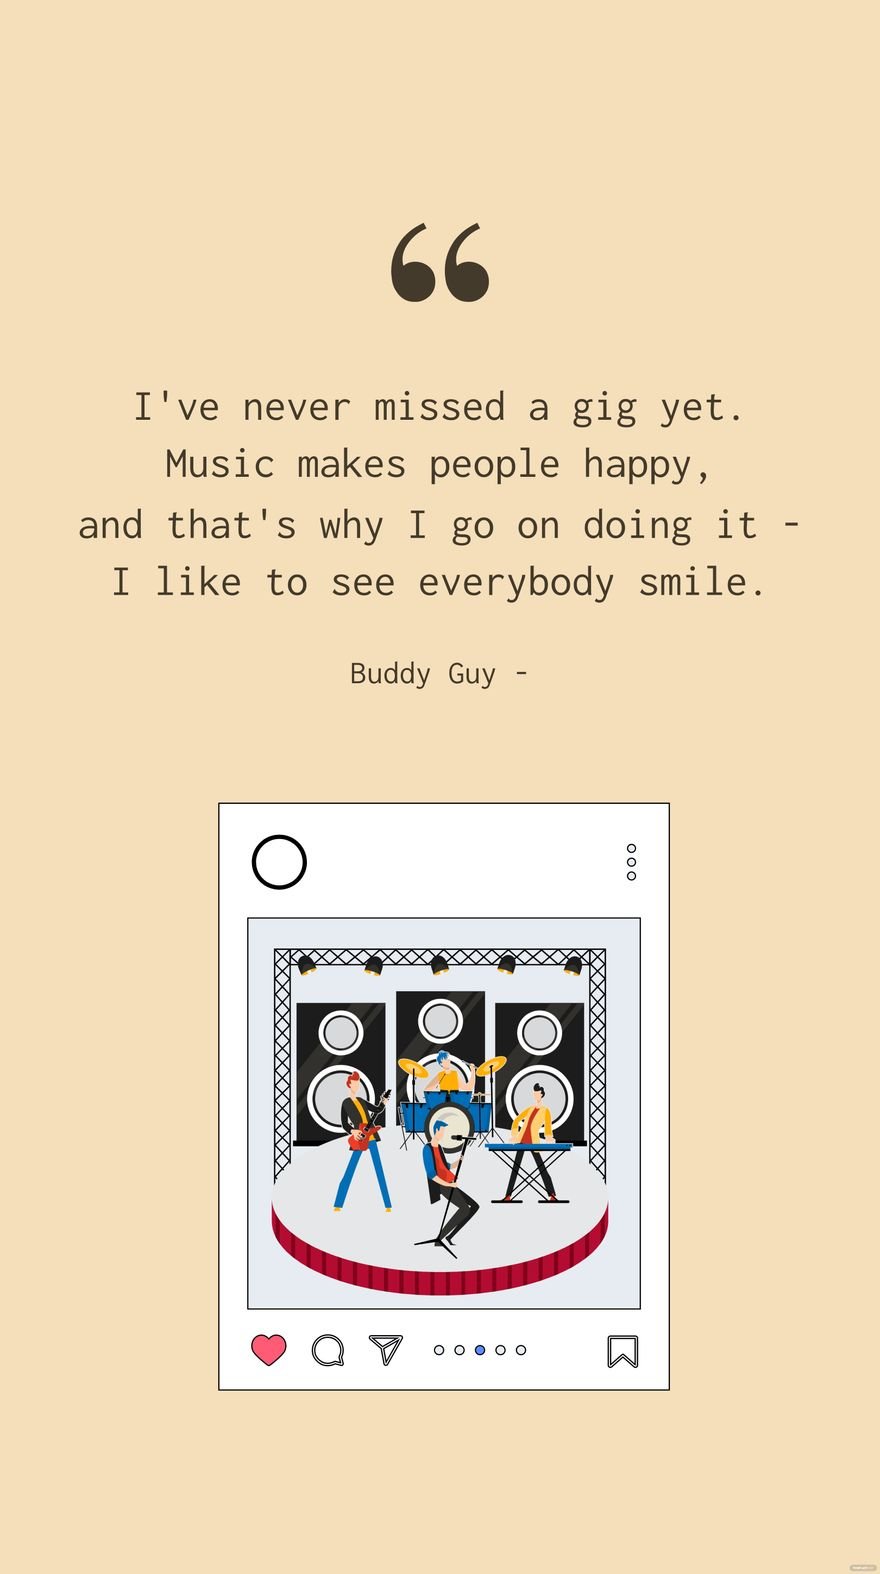 Free Buddy Guy - I've never missed a gig yet. Music makes people happy, and that's why I go on doing it - I like to see everybody smile. in JPG